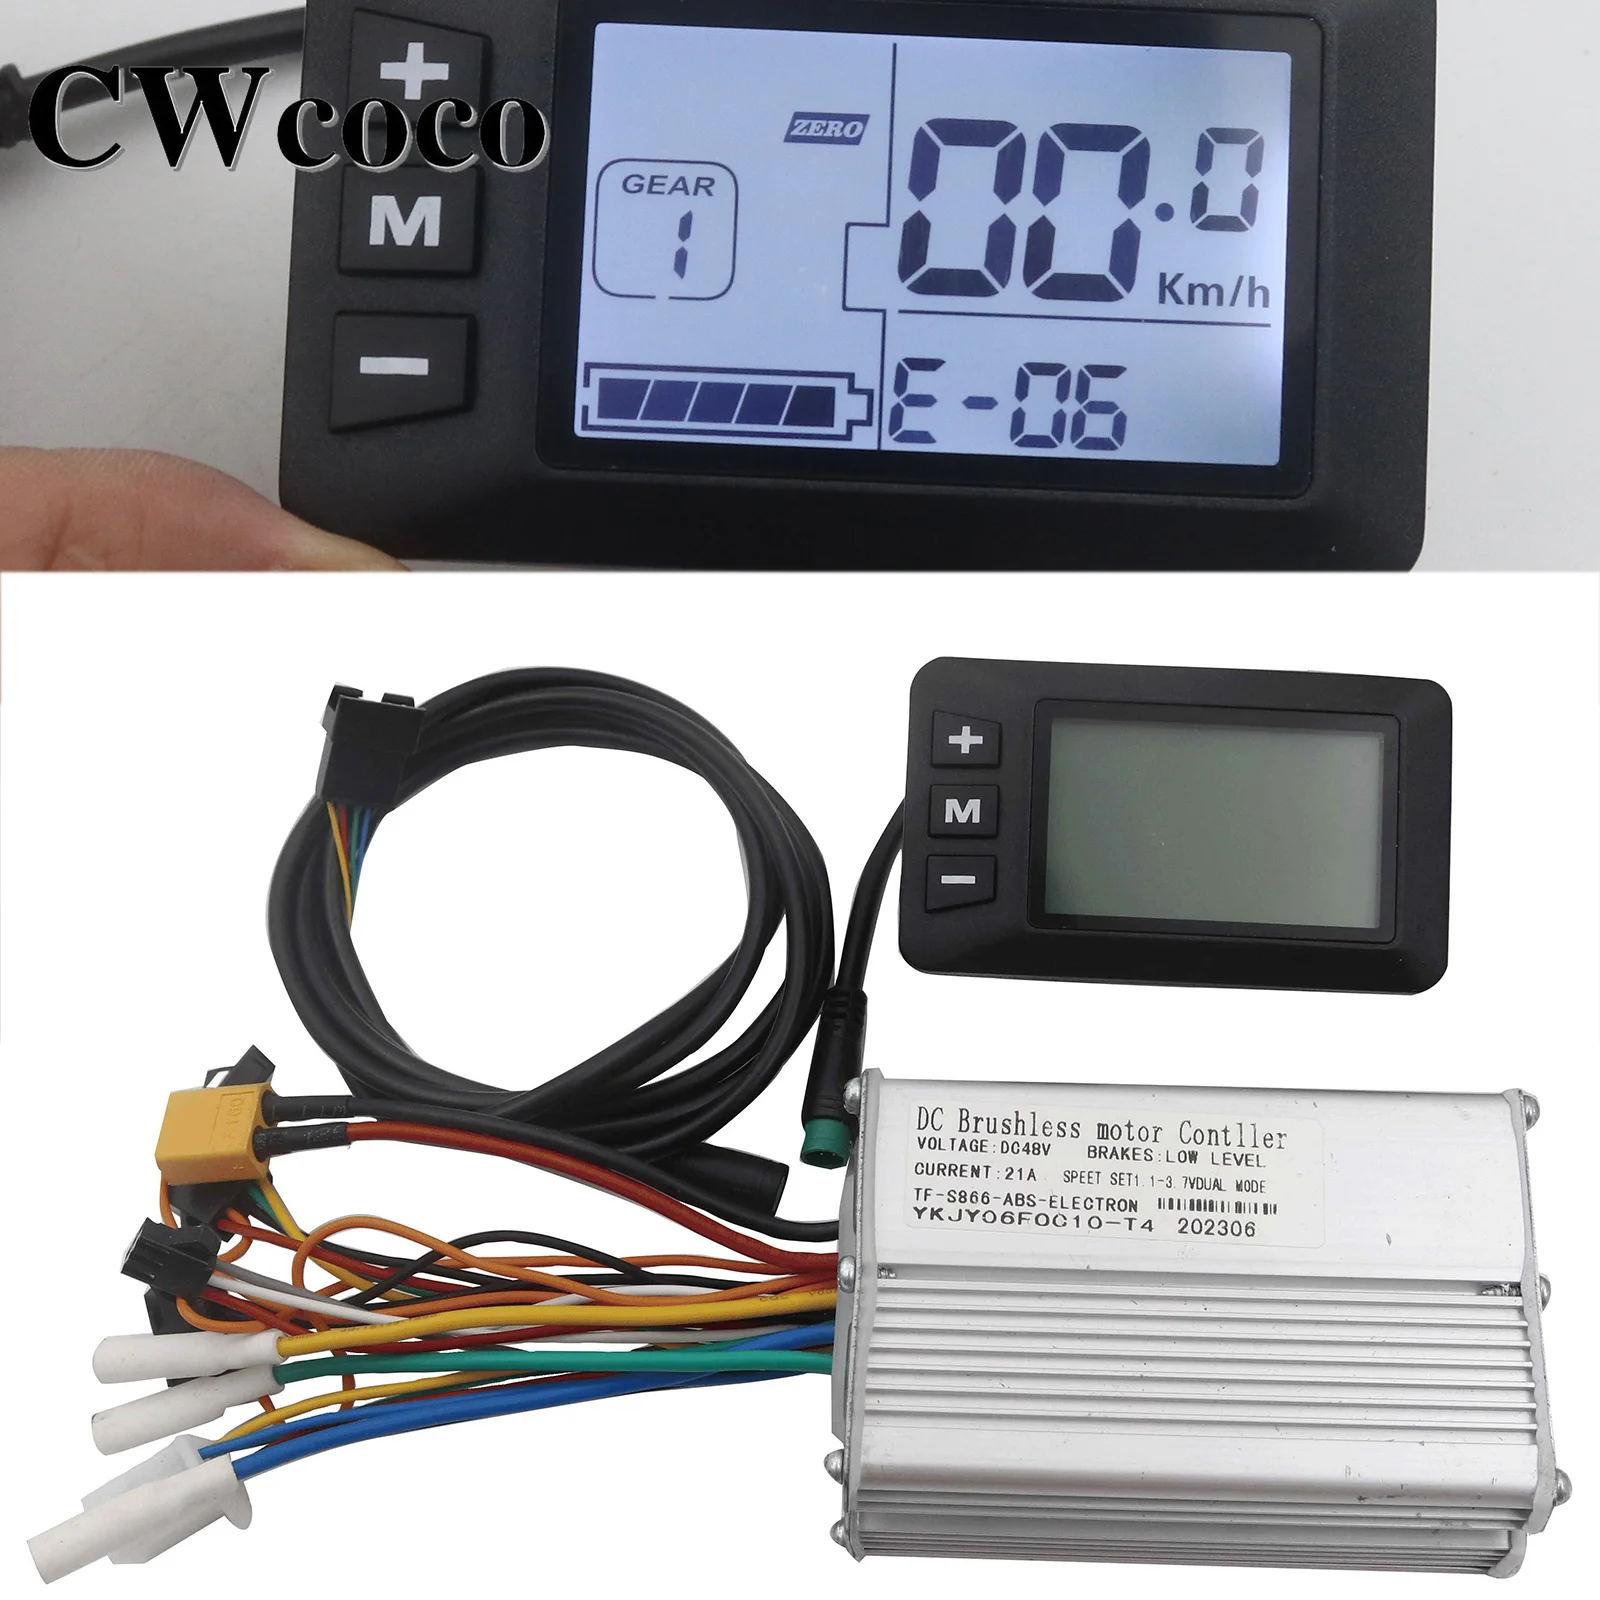 

48V 21A New Type Electric Bike DC Brushless Motor Controller With Colour Screen S866 LCD Display For Electric Scooter